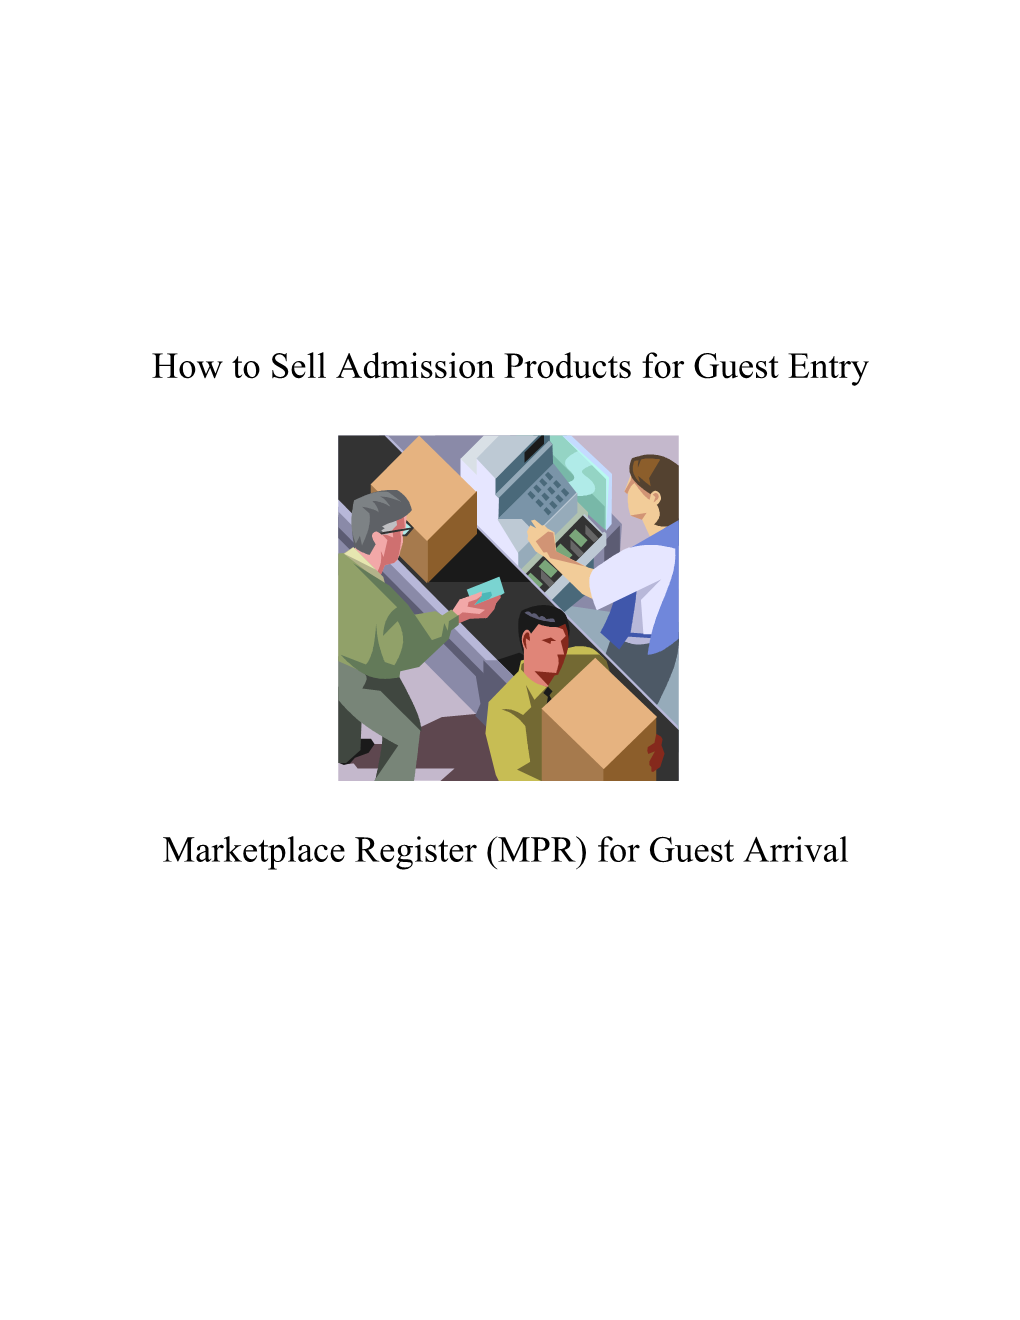 How to Sell Admission Products for Guest Entry